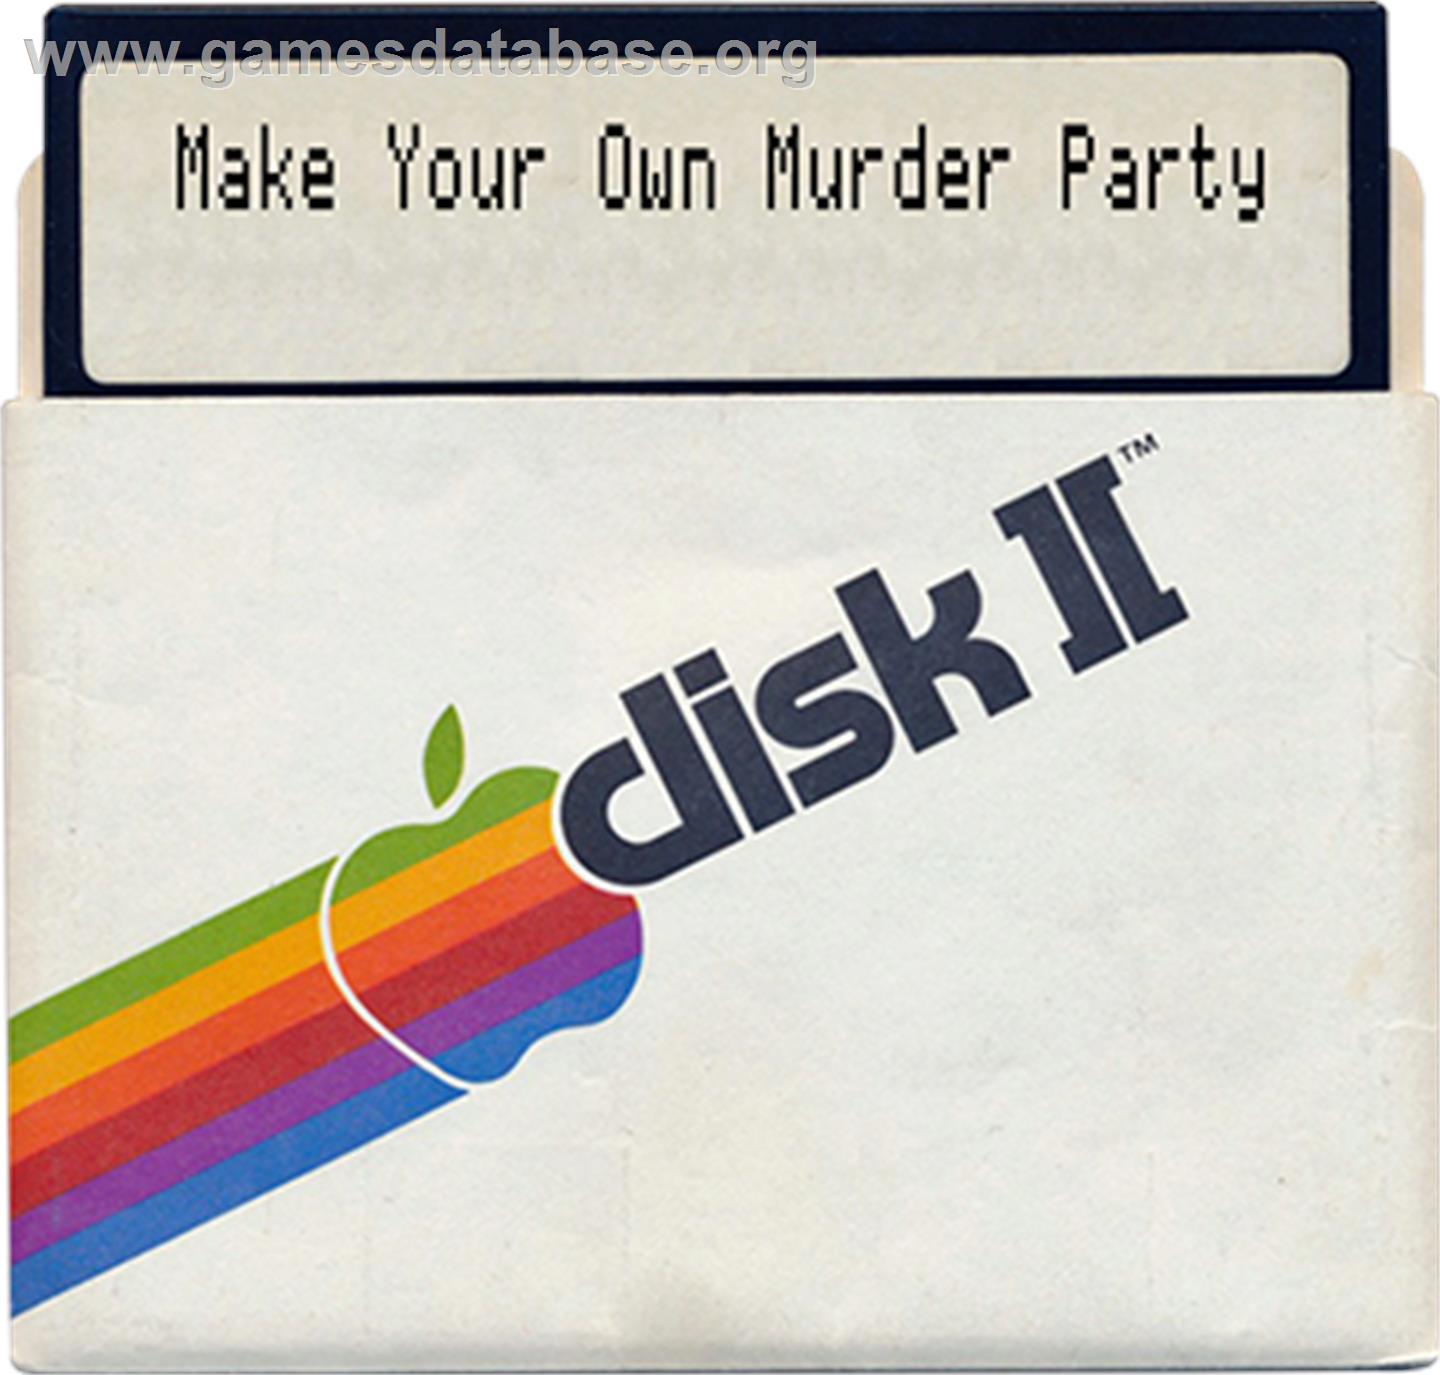 Make Your Own Murder Party - Apple II - Artwork - Disc